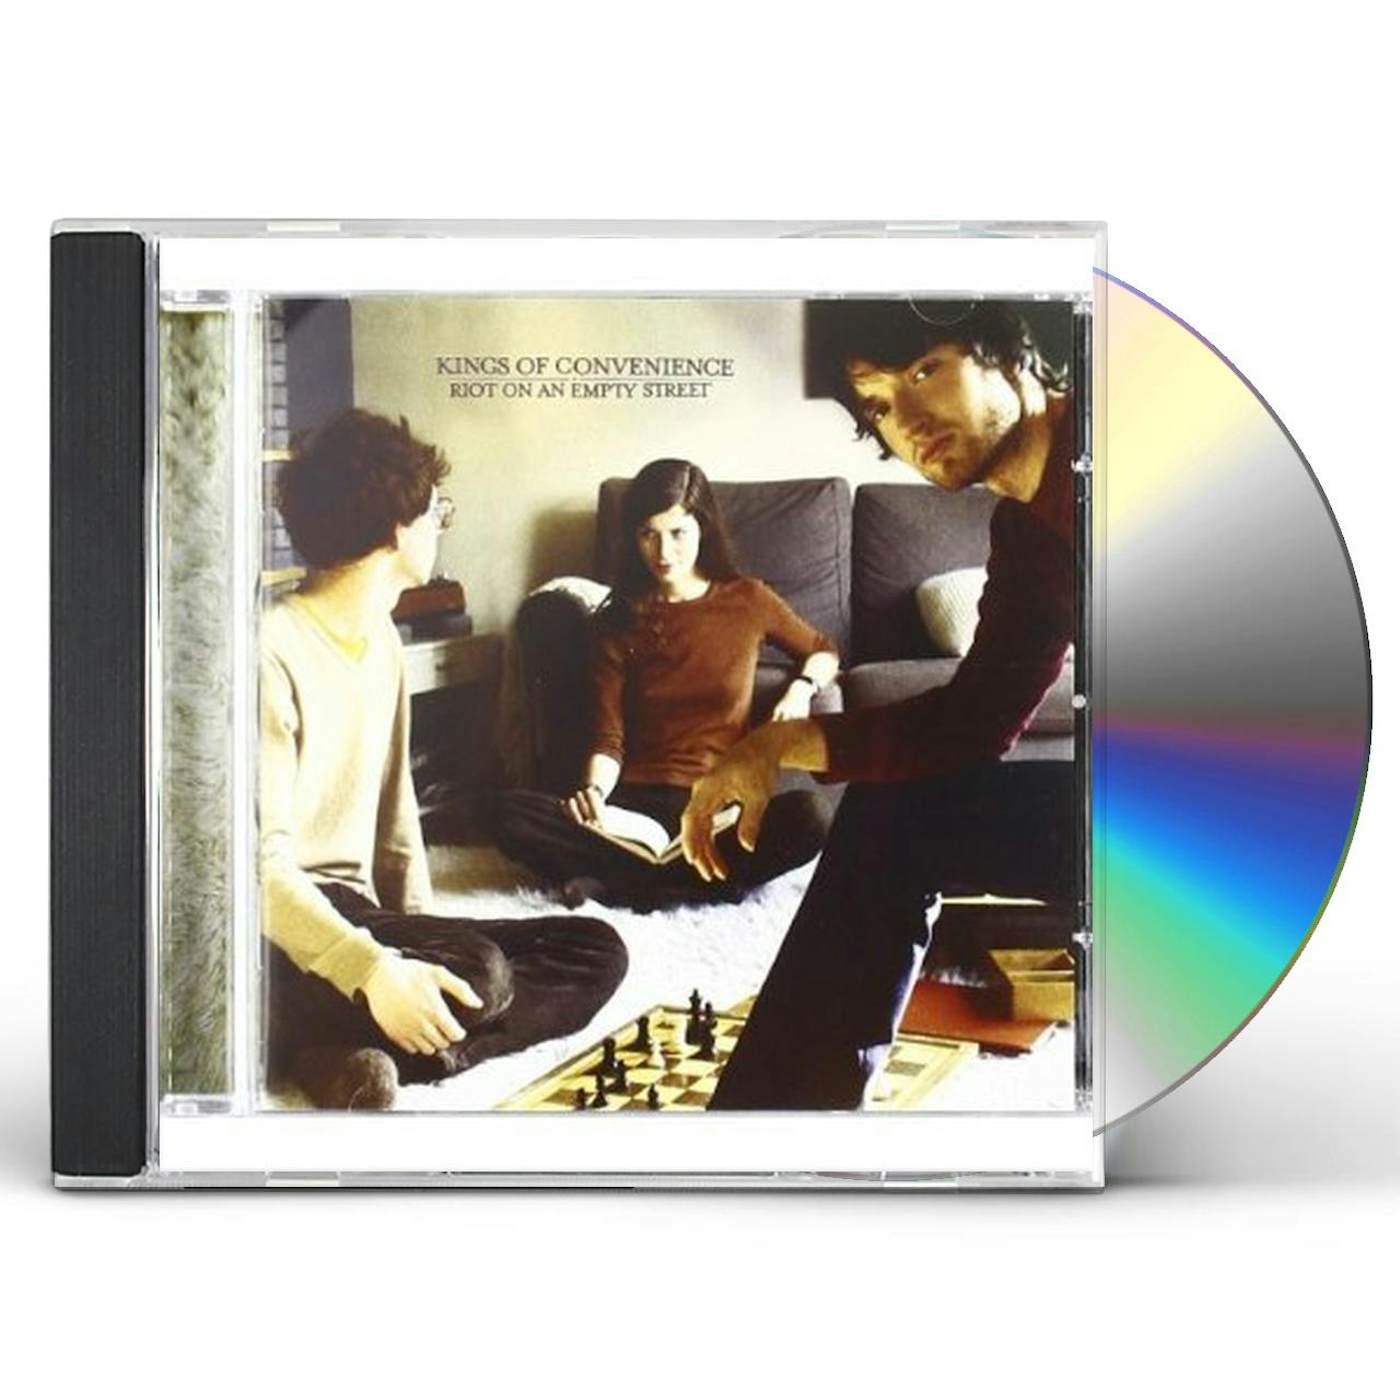 Kings of Convenience RIOT ON AN EMPTY STREET CD